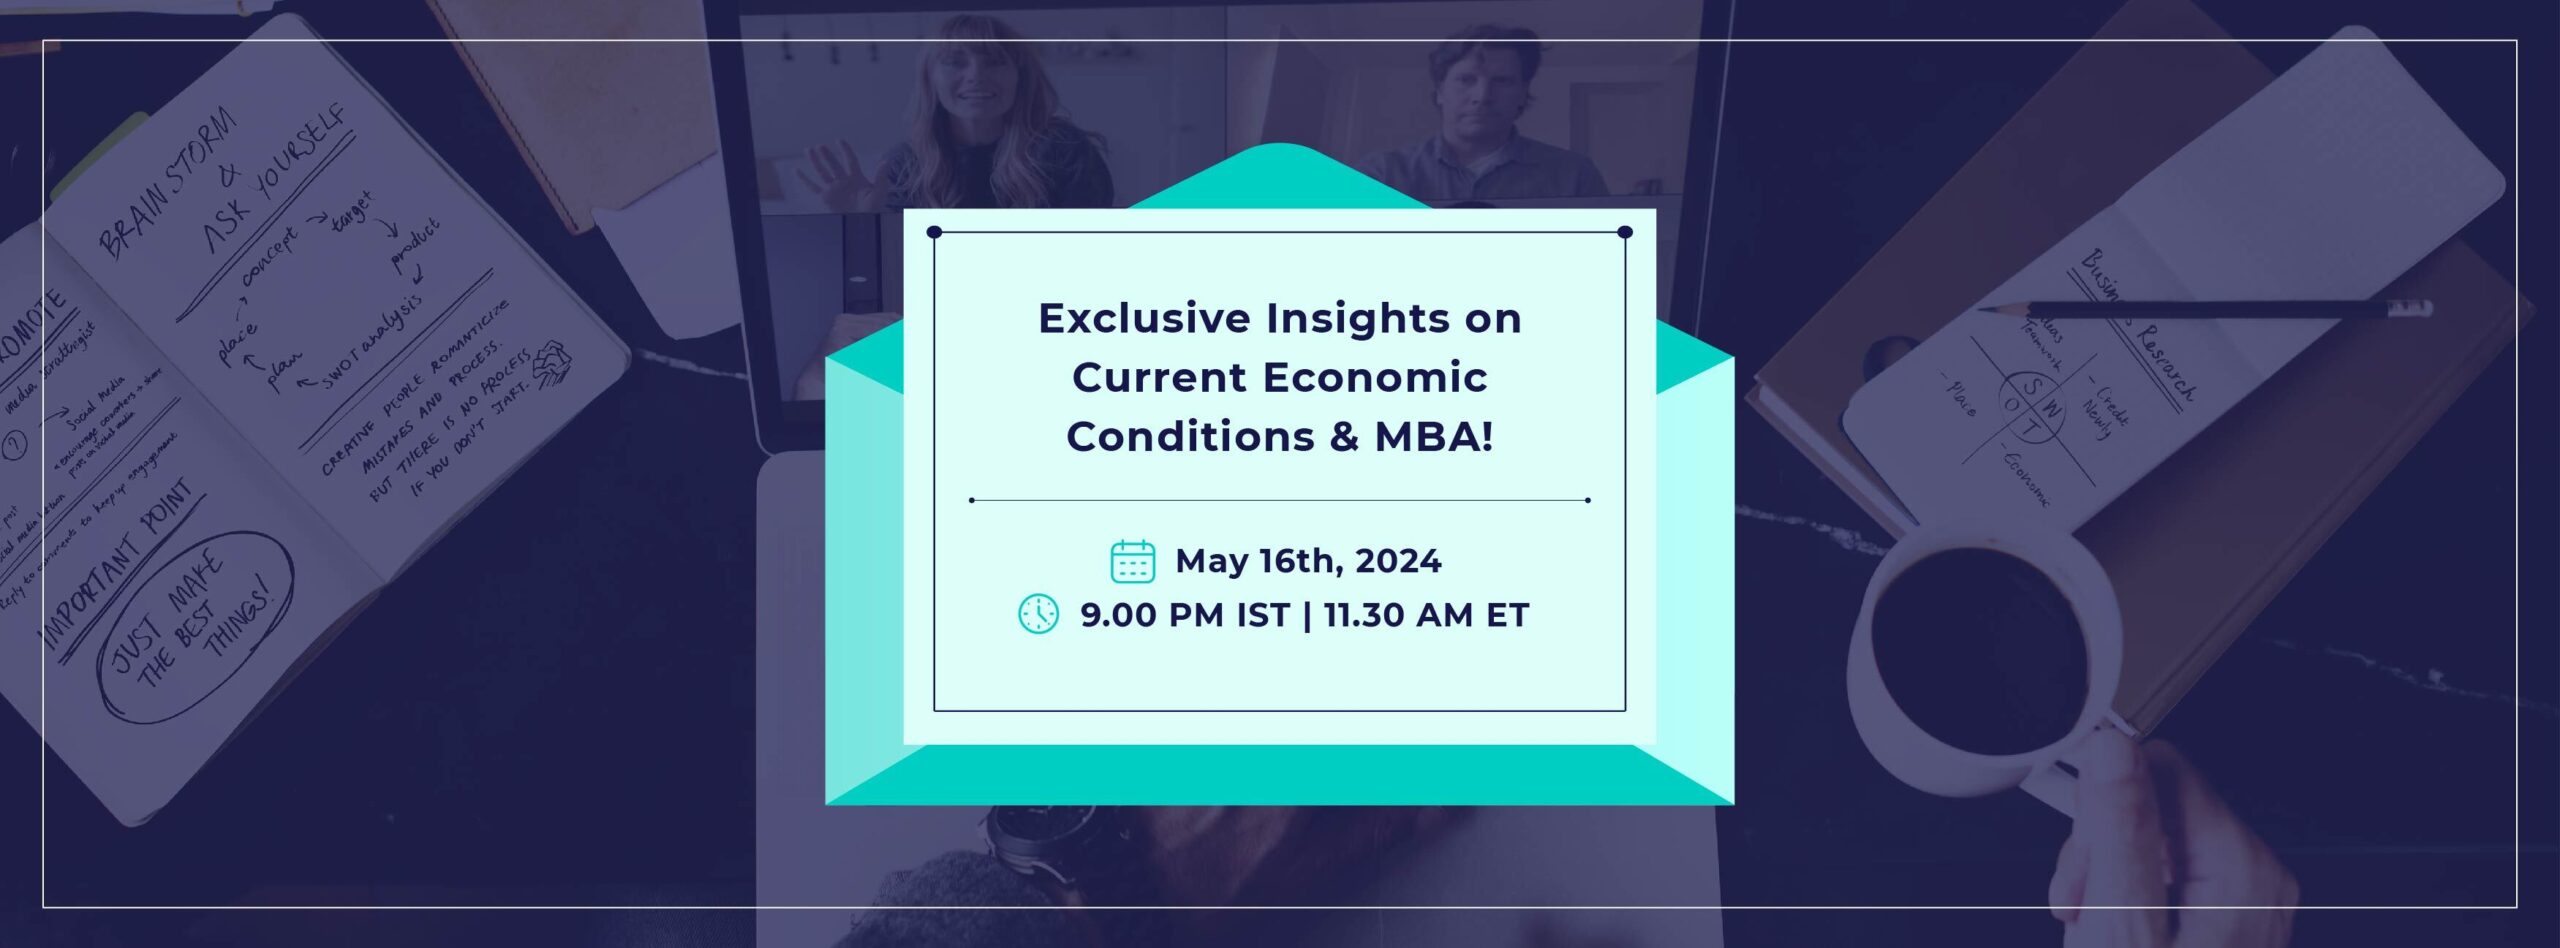 Exclusive Insights on Current Economic Conditions & MBA!